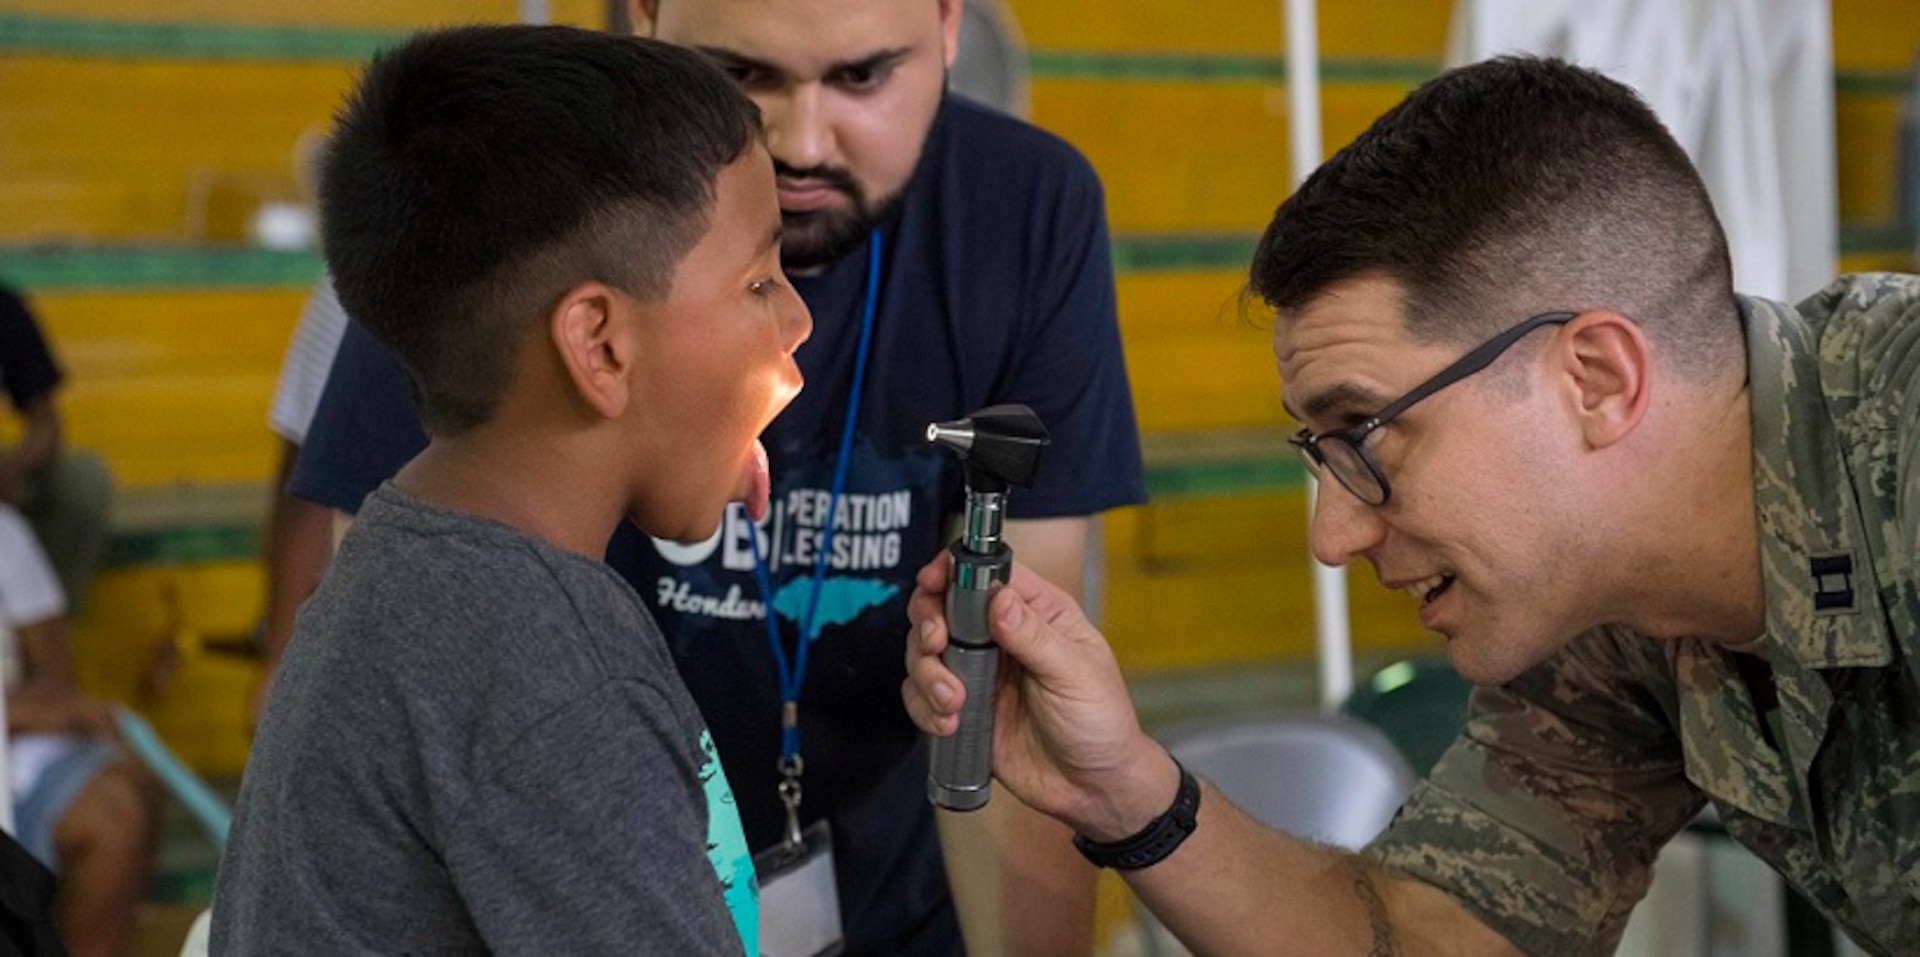 An Air Force doctor looks into a child's mouth during a physical exam in Honduras.